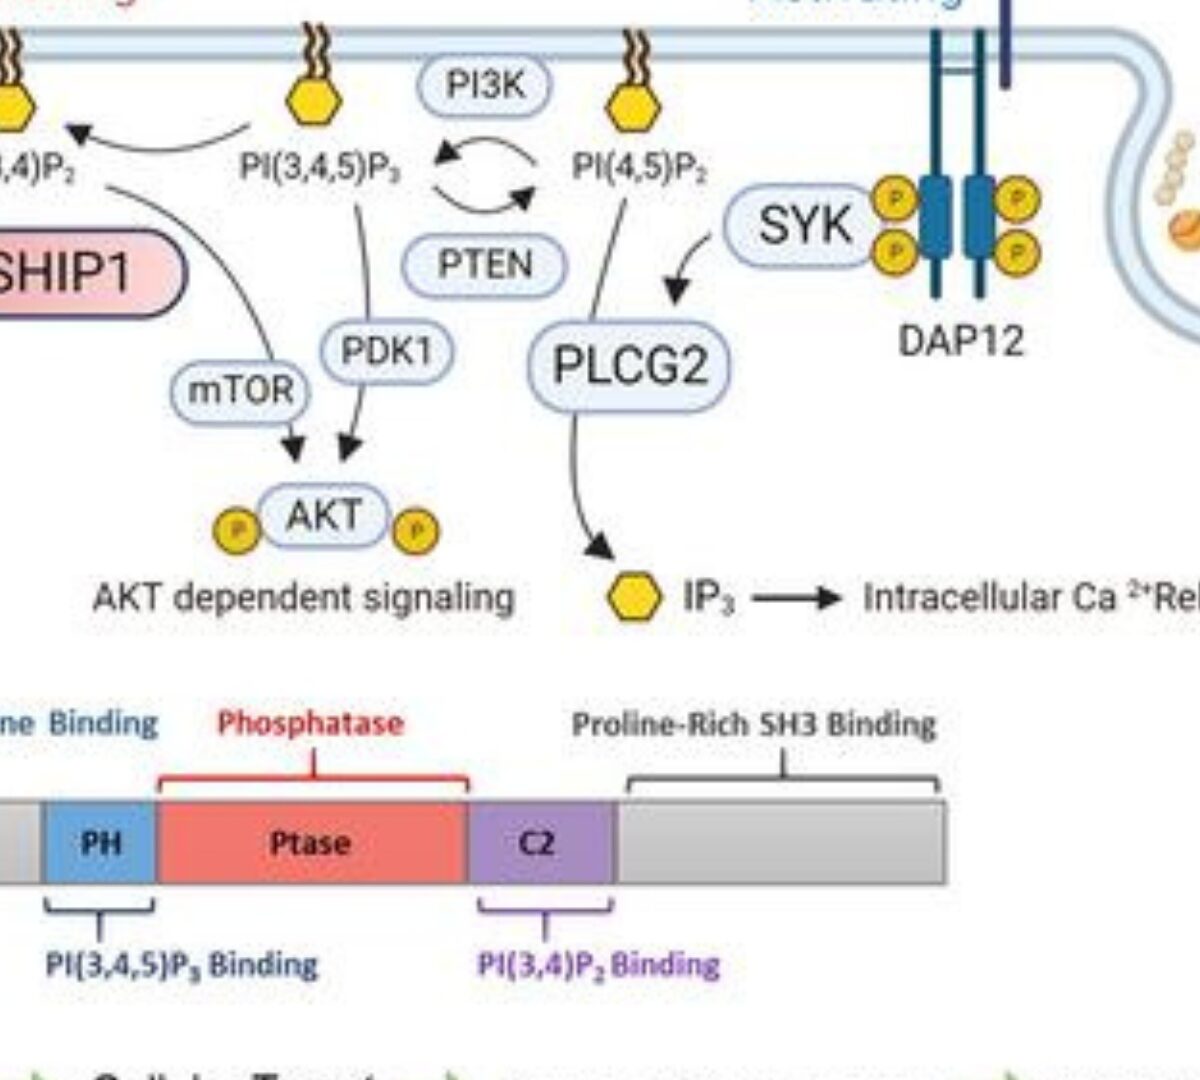 SHIP1 therapeutic target enablement: Identification and evaluation of inhibitors for the treatment of late-onset Alzheimer’s disease